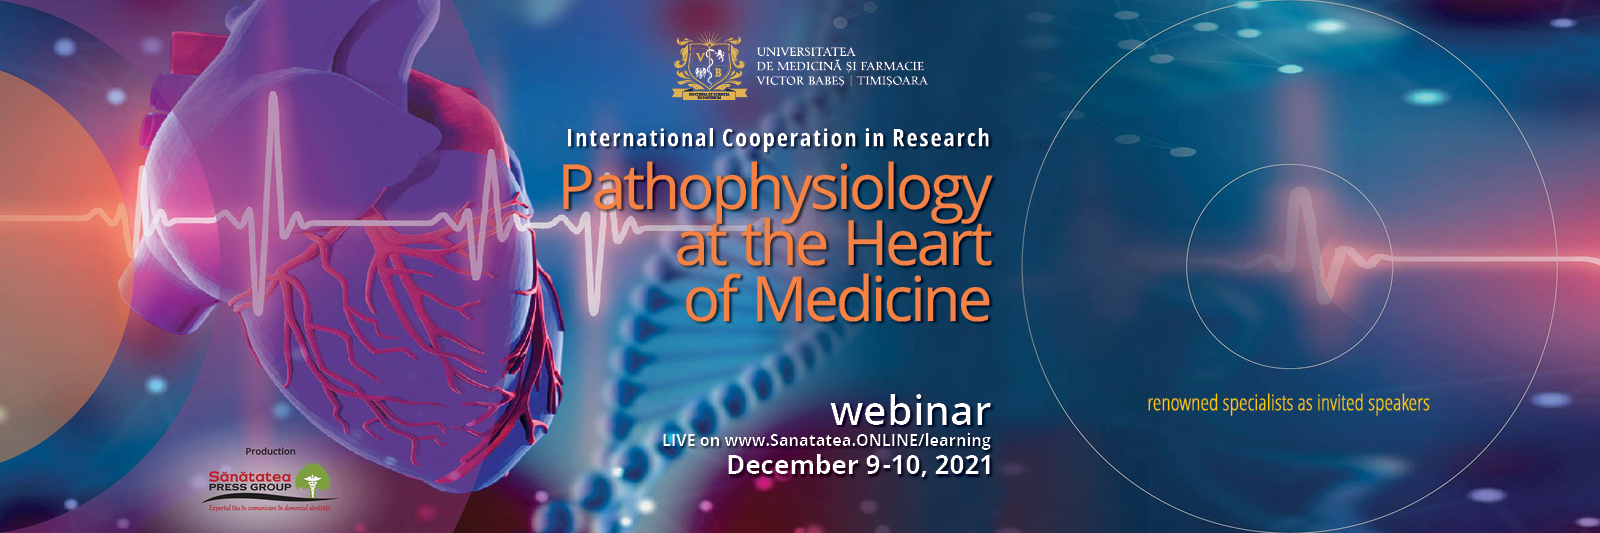 09-10.2021 | International Cooperation in research – Pathophysiology at the Heart of medicine